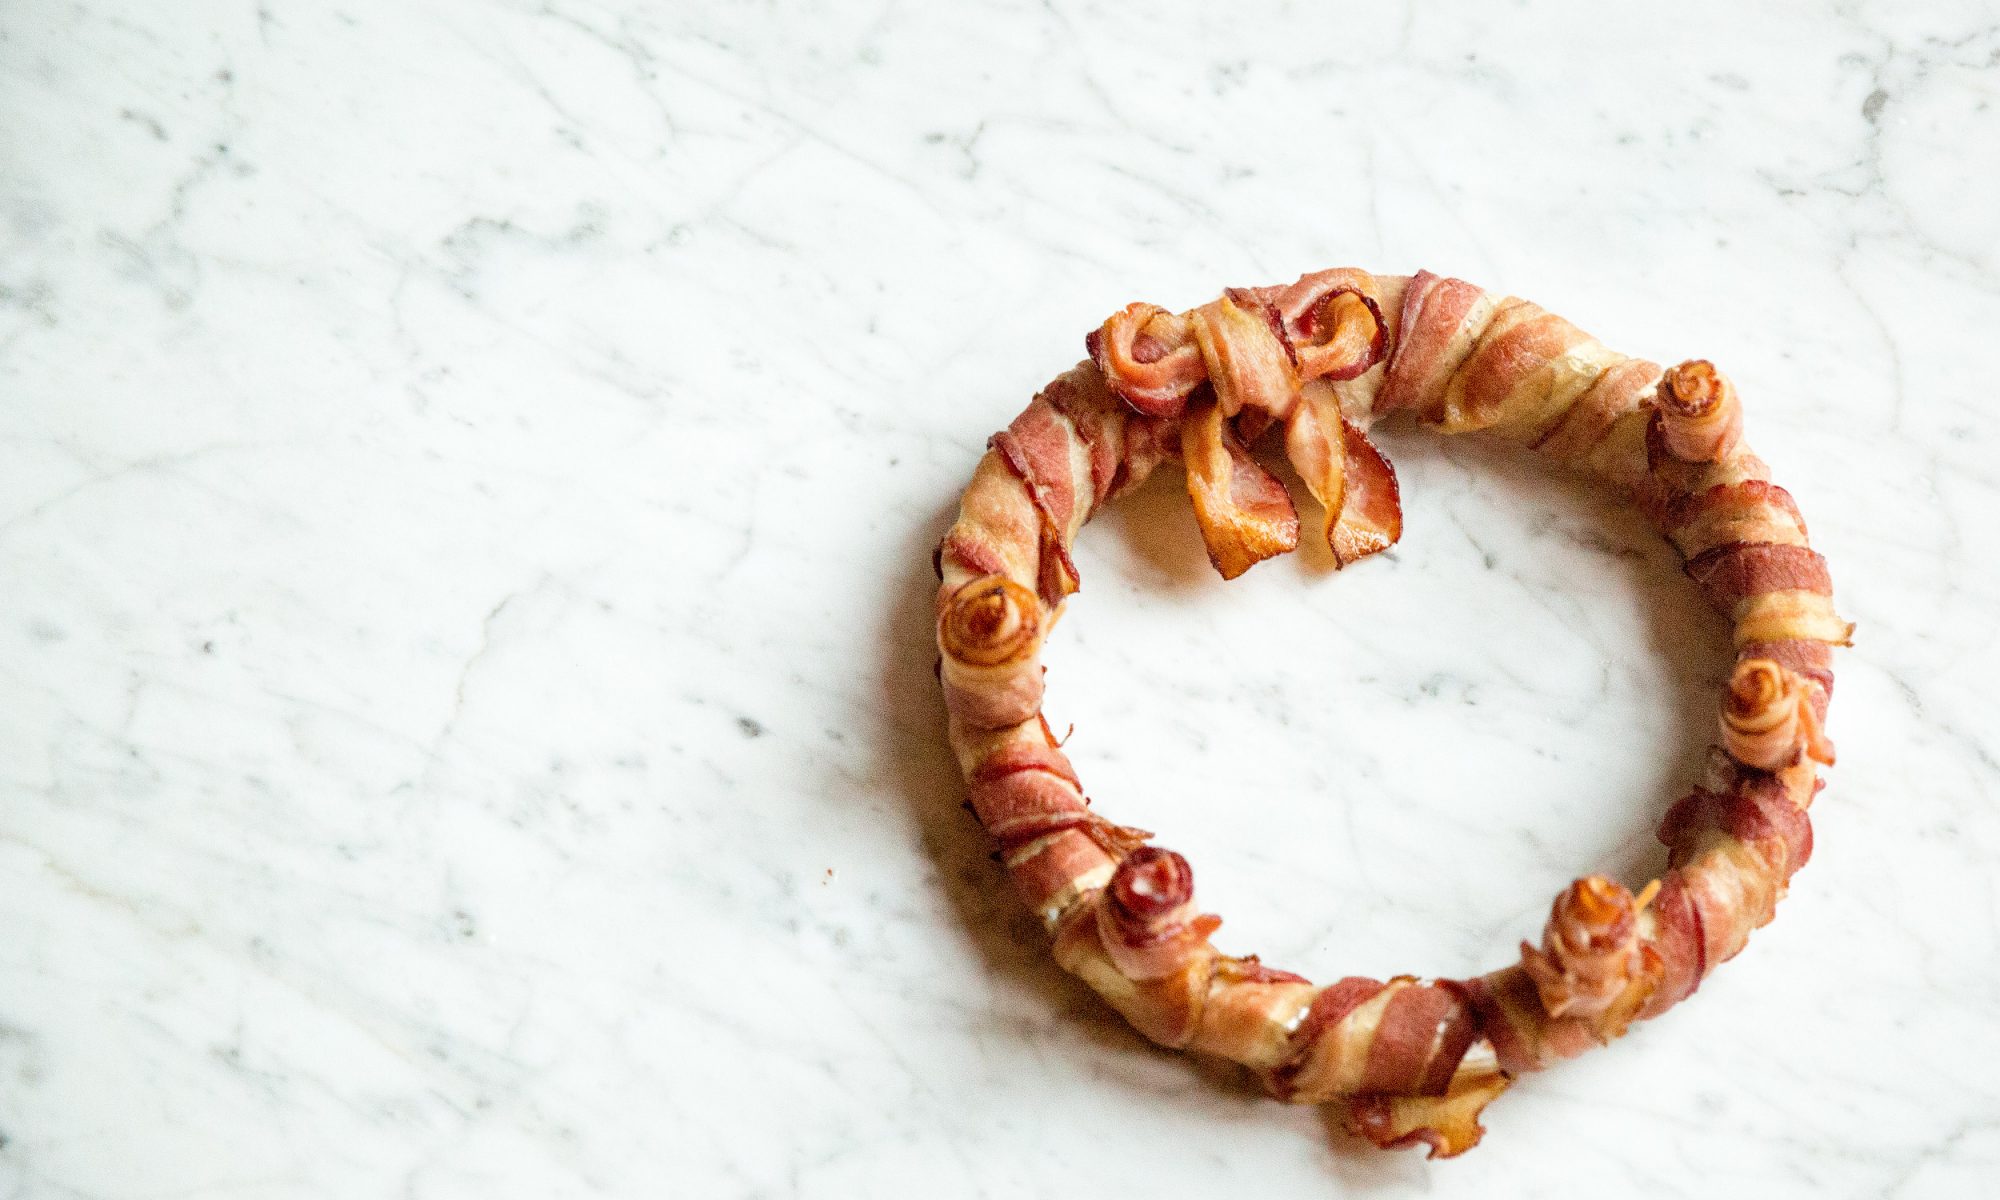 EC: The Only Bacon Wreath Video the Internet Needs